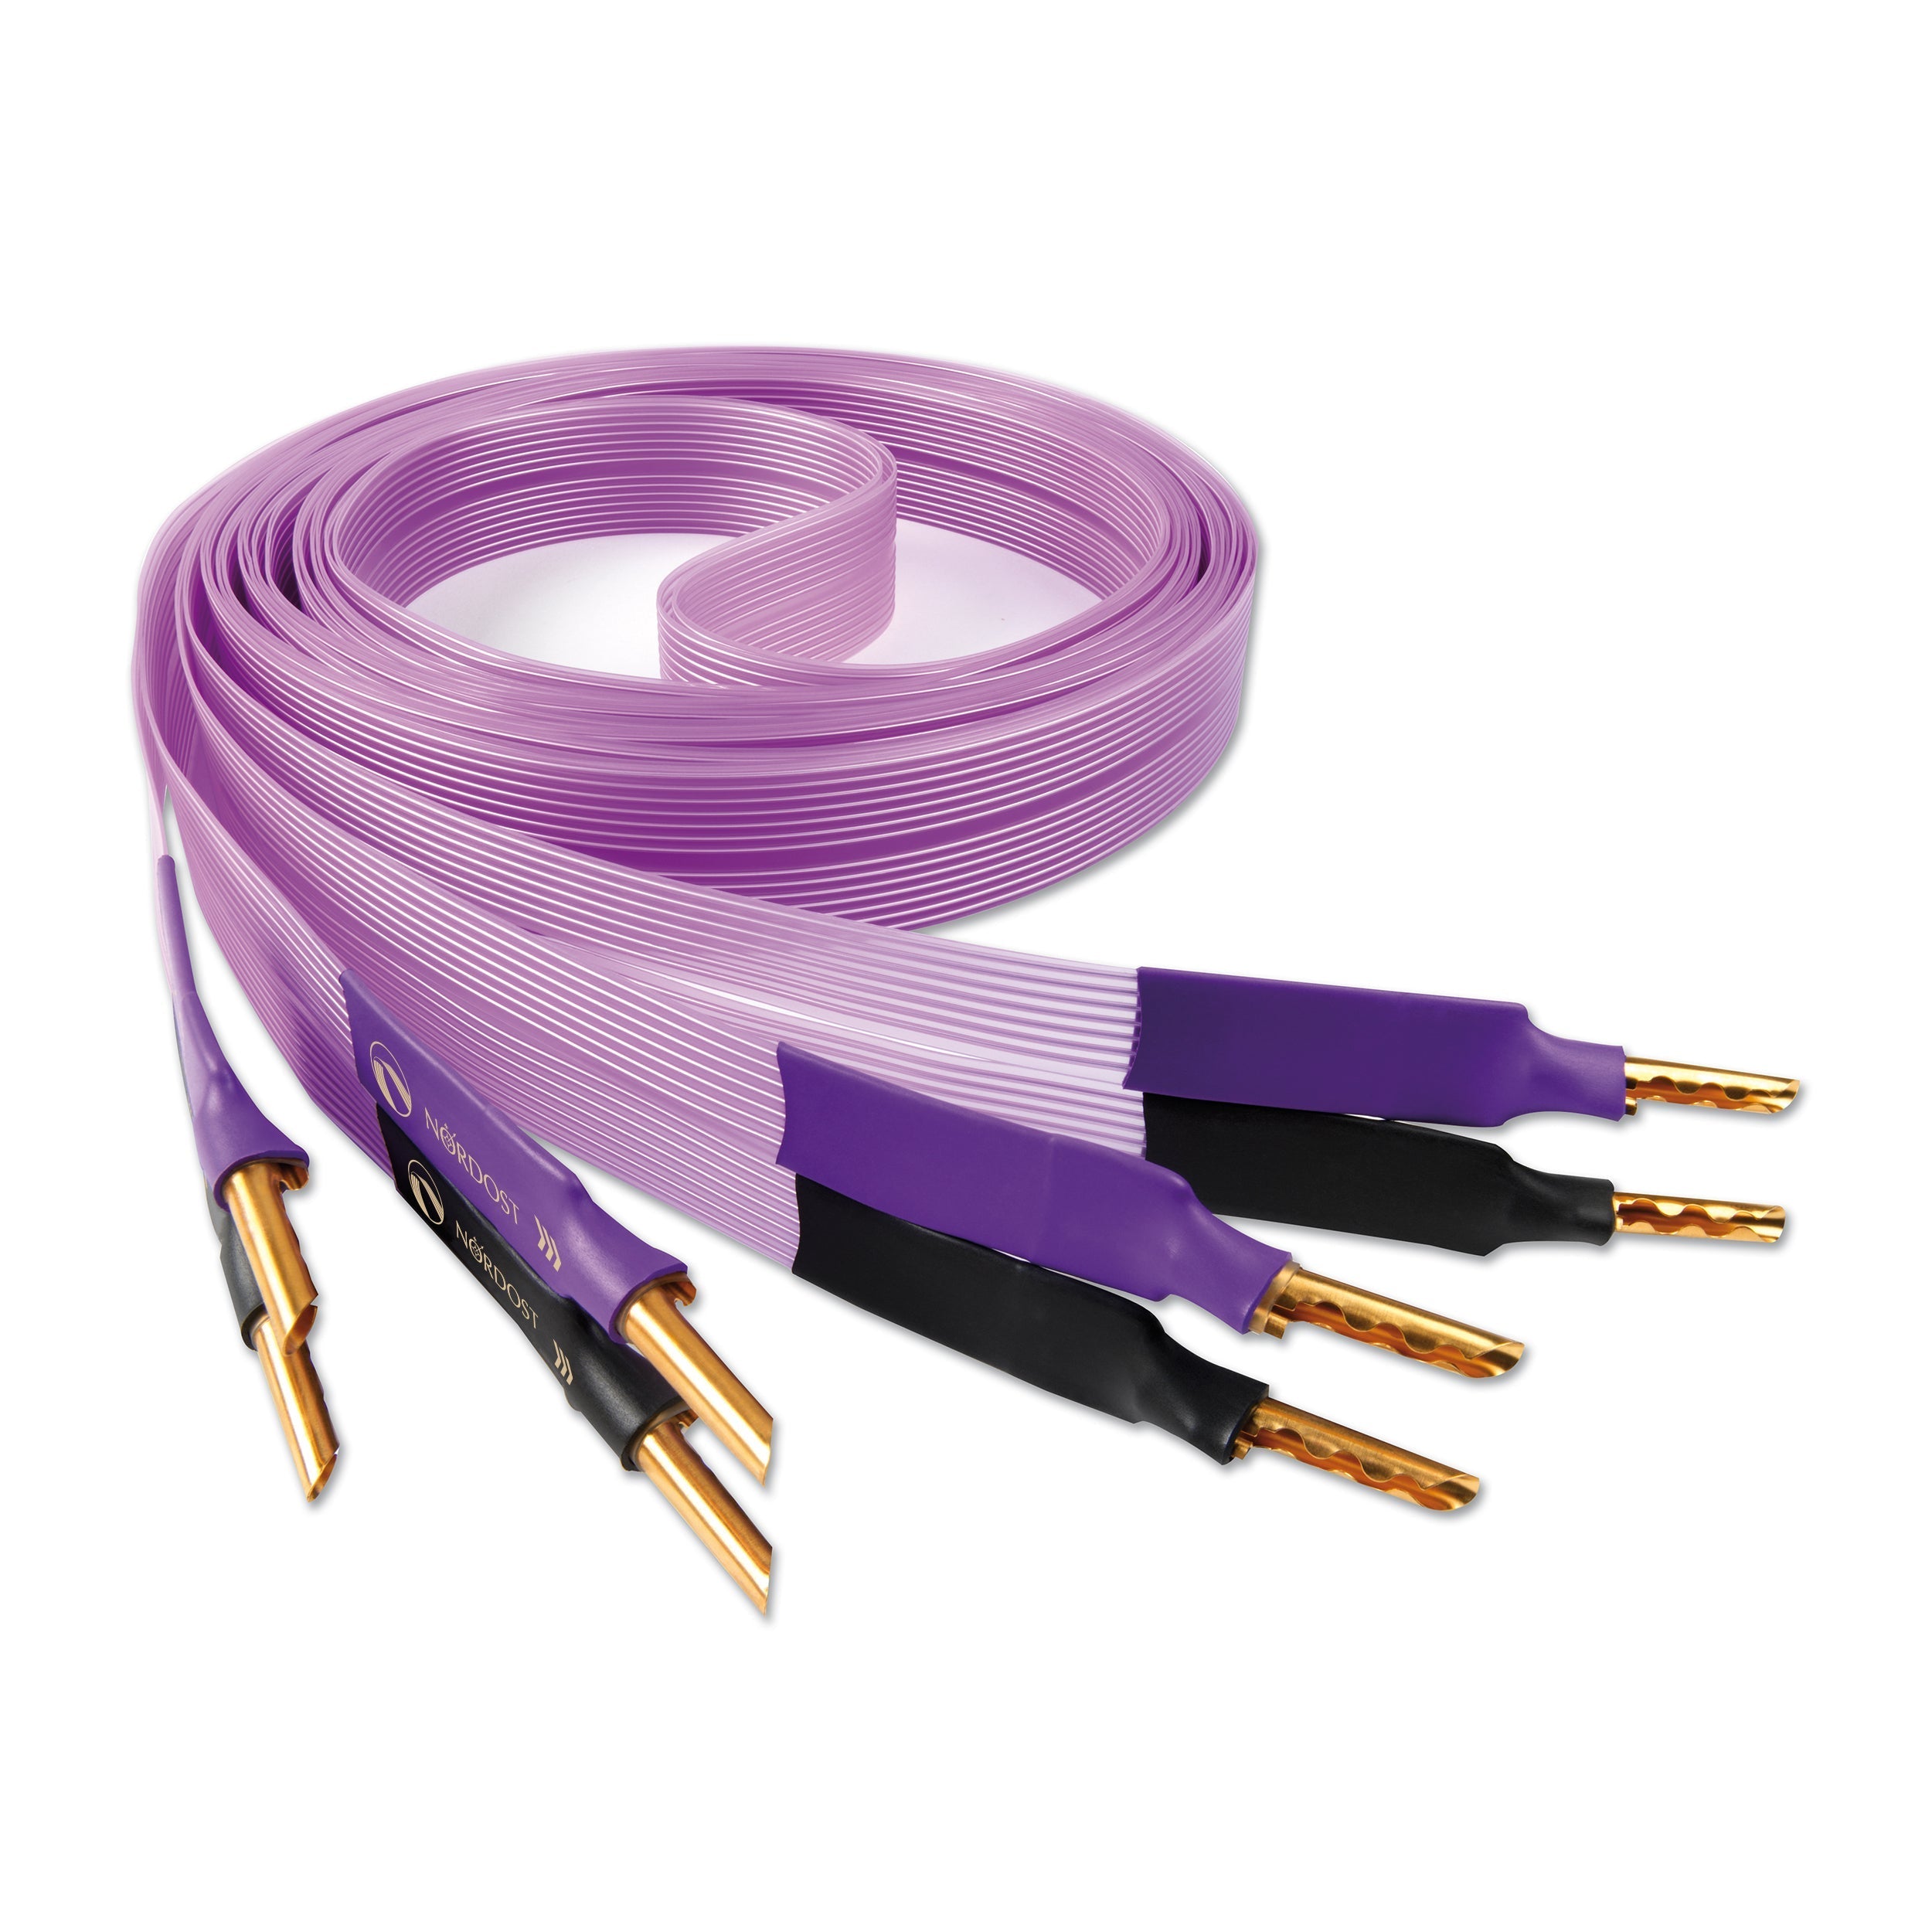 Nordost Leif Purple Flare Speaker Cable